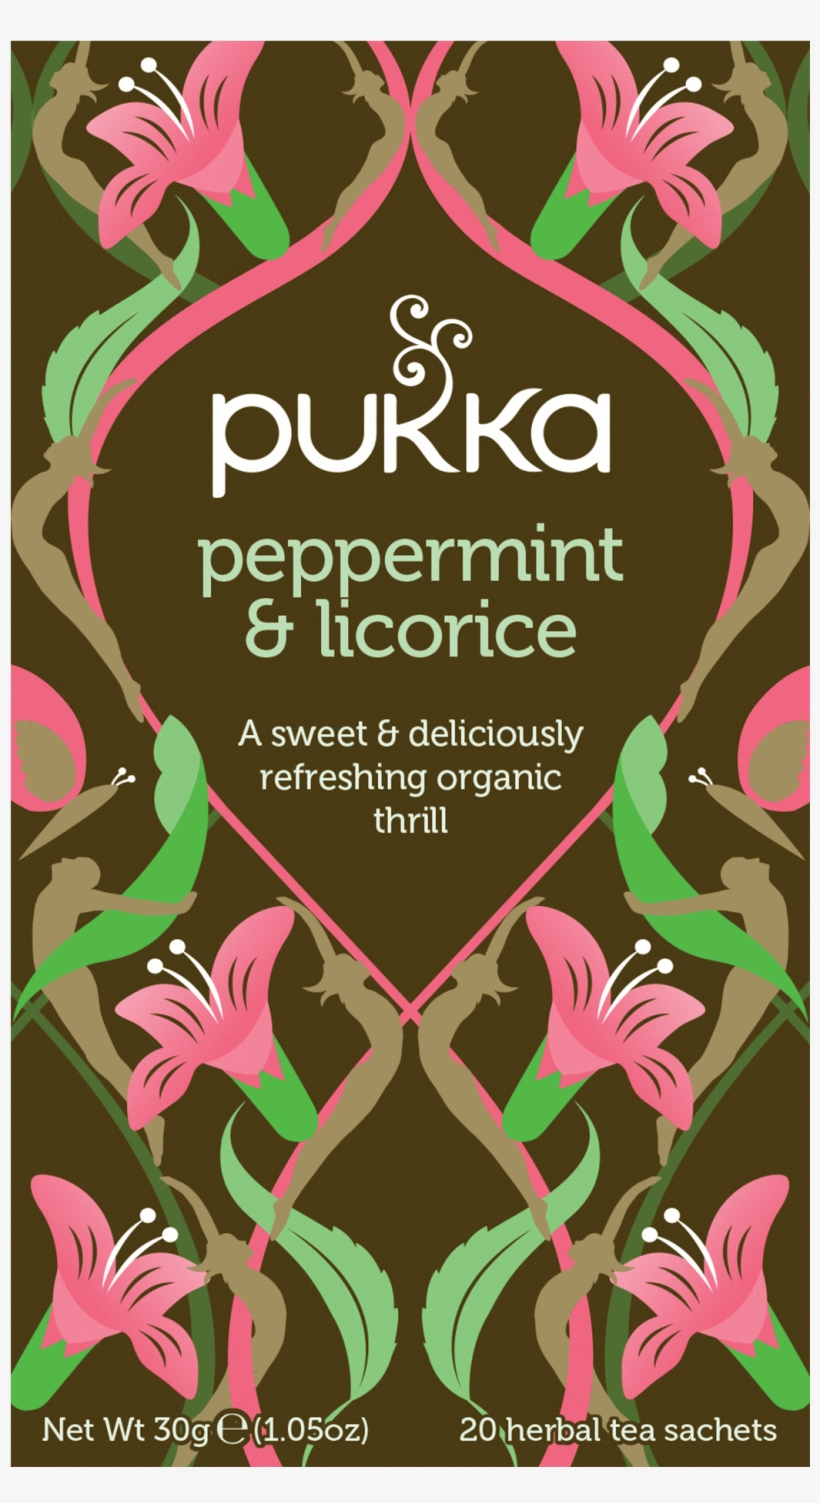 Pukka Peppermint And Licorice Tea, transparent png #7631163